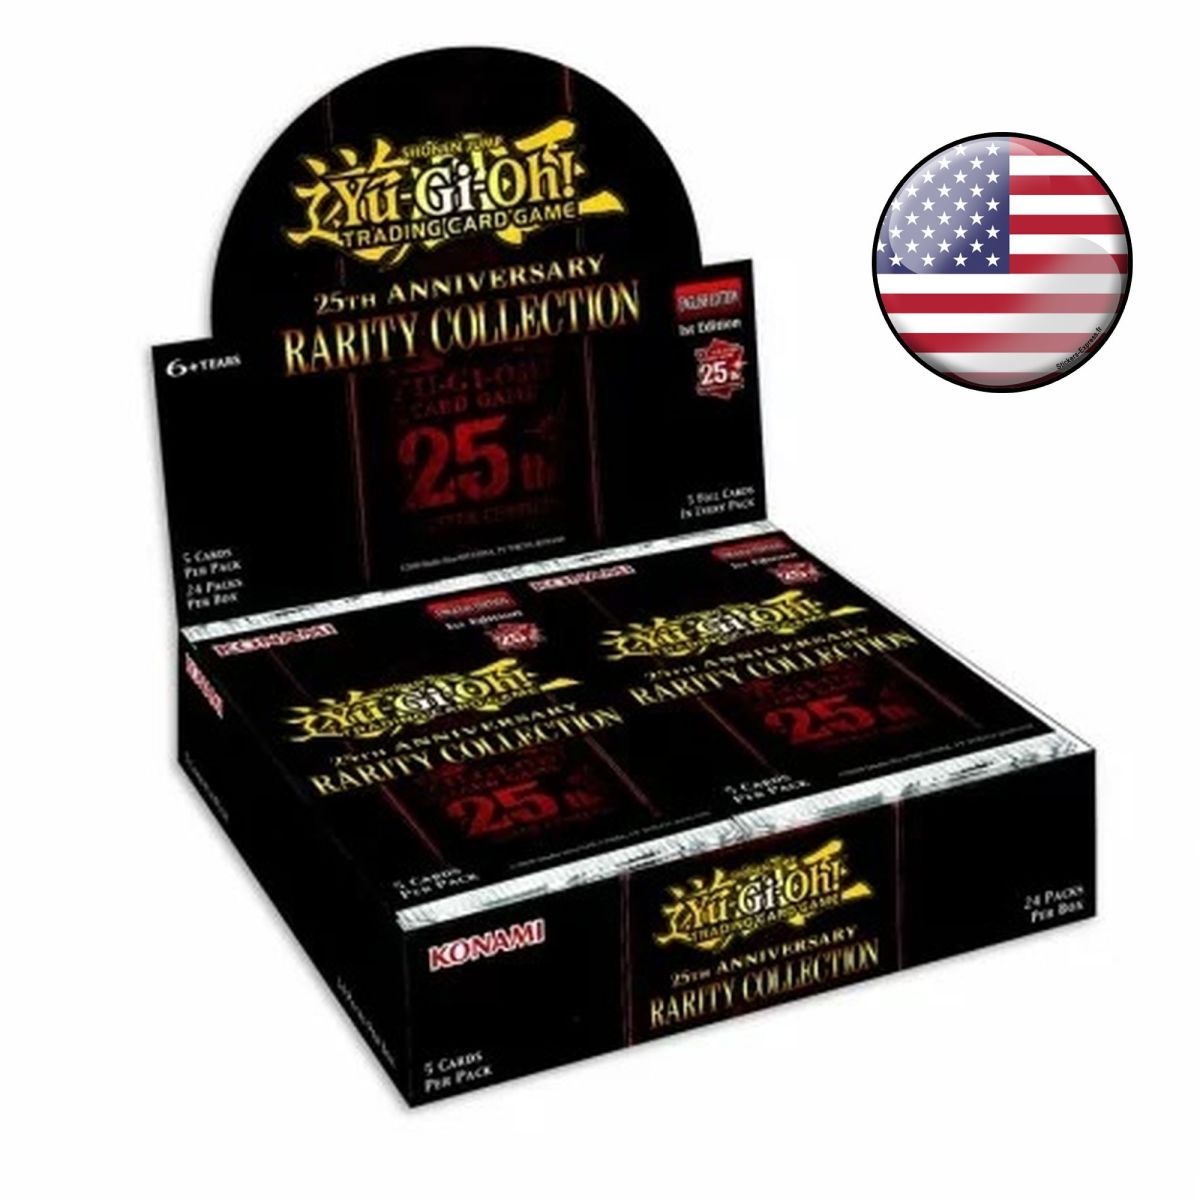 *US Print SEALED* Yu-Gi-Oh! JCC - Display - Box of 24 Boosters - Rarity Collection 25th Anniversary Edition - US